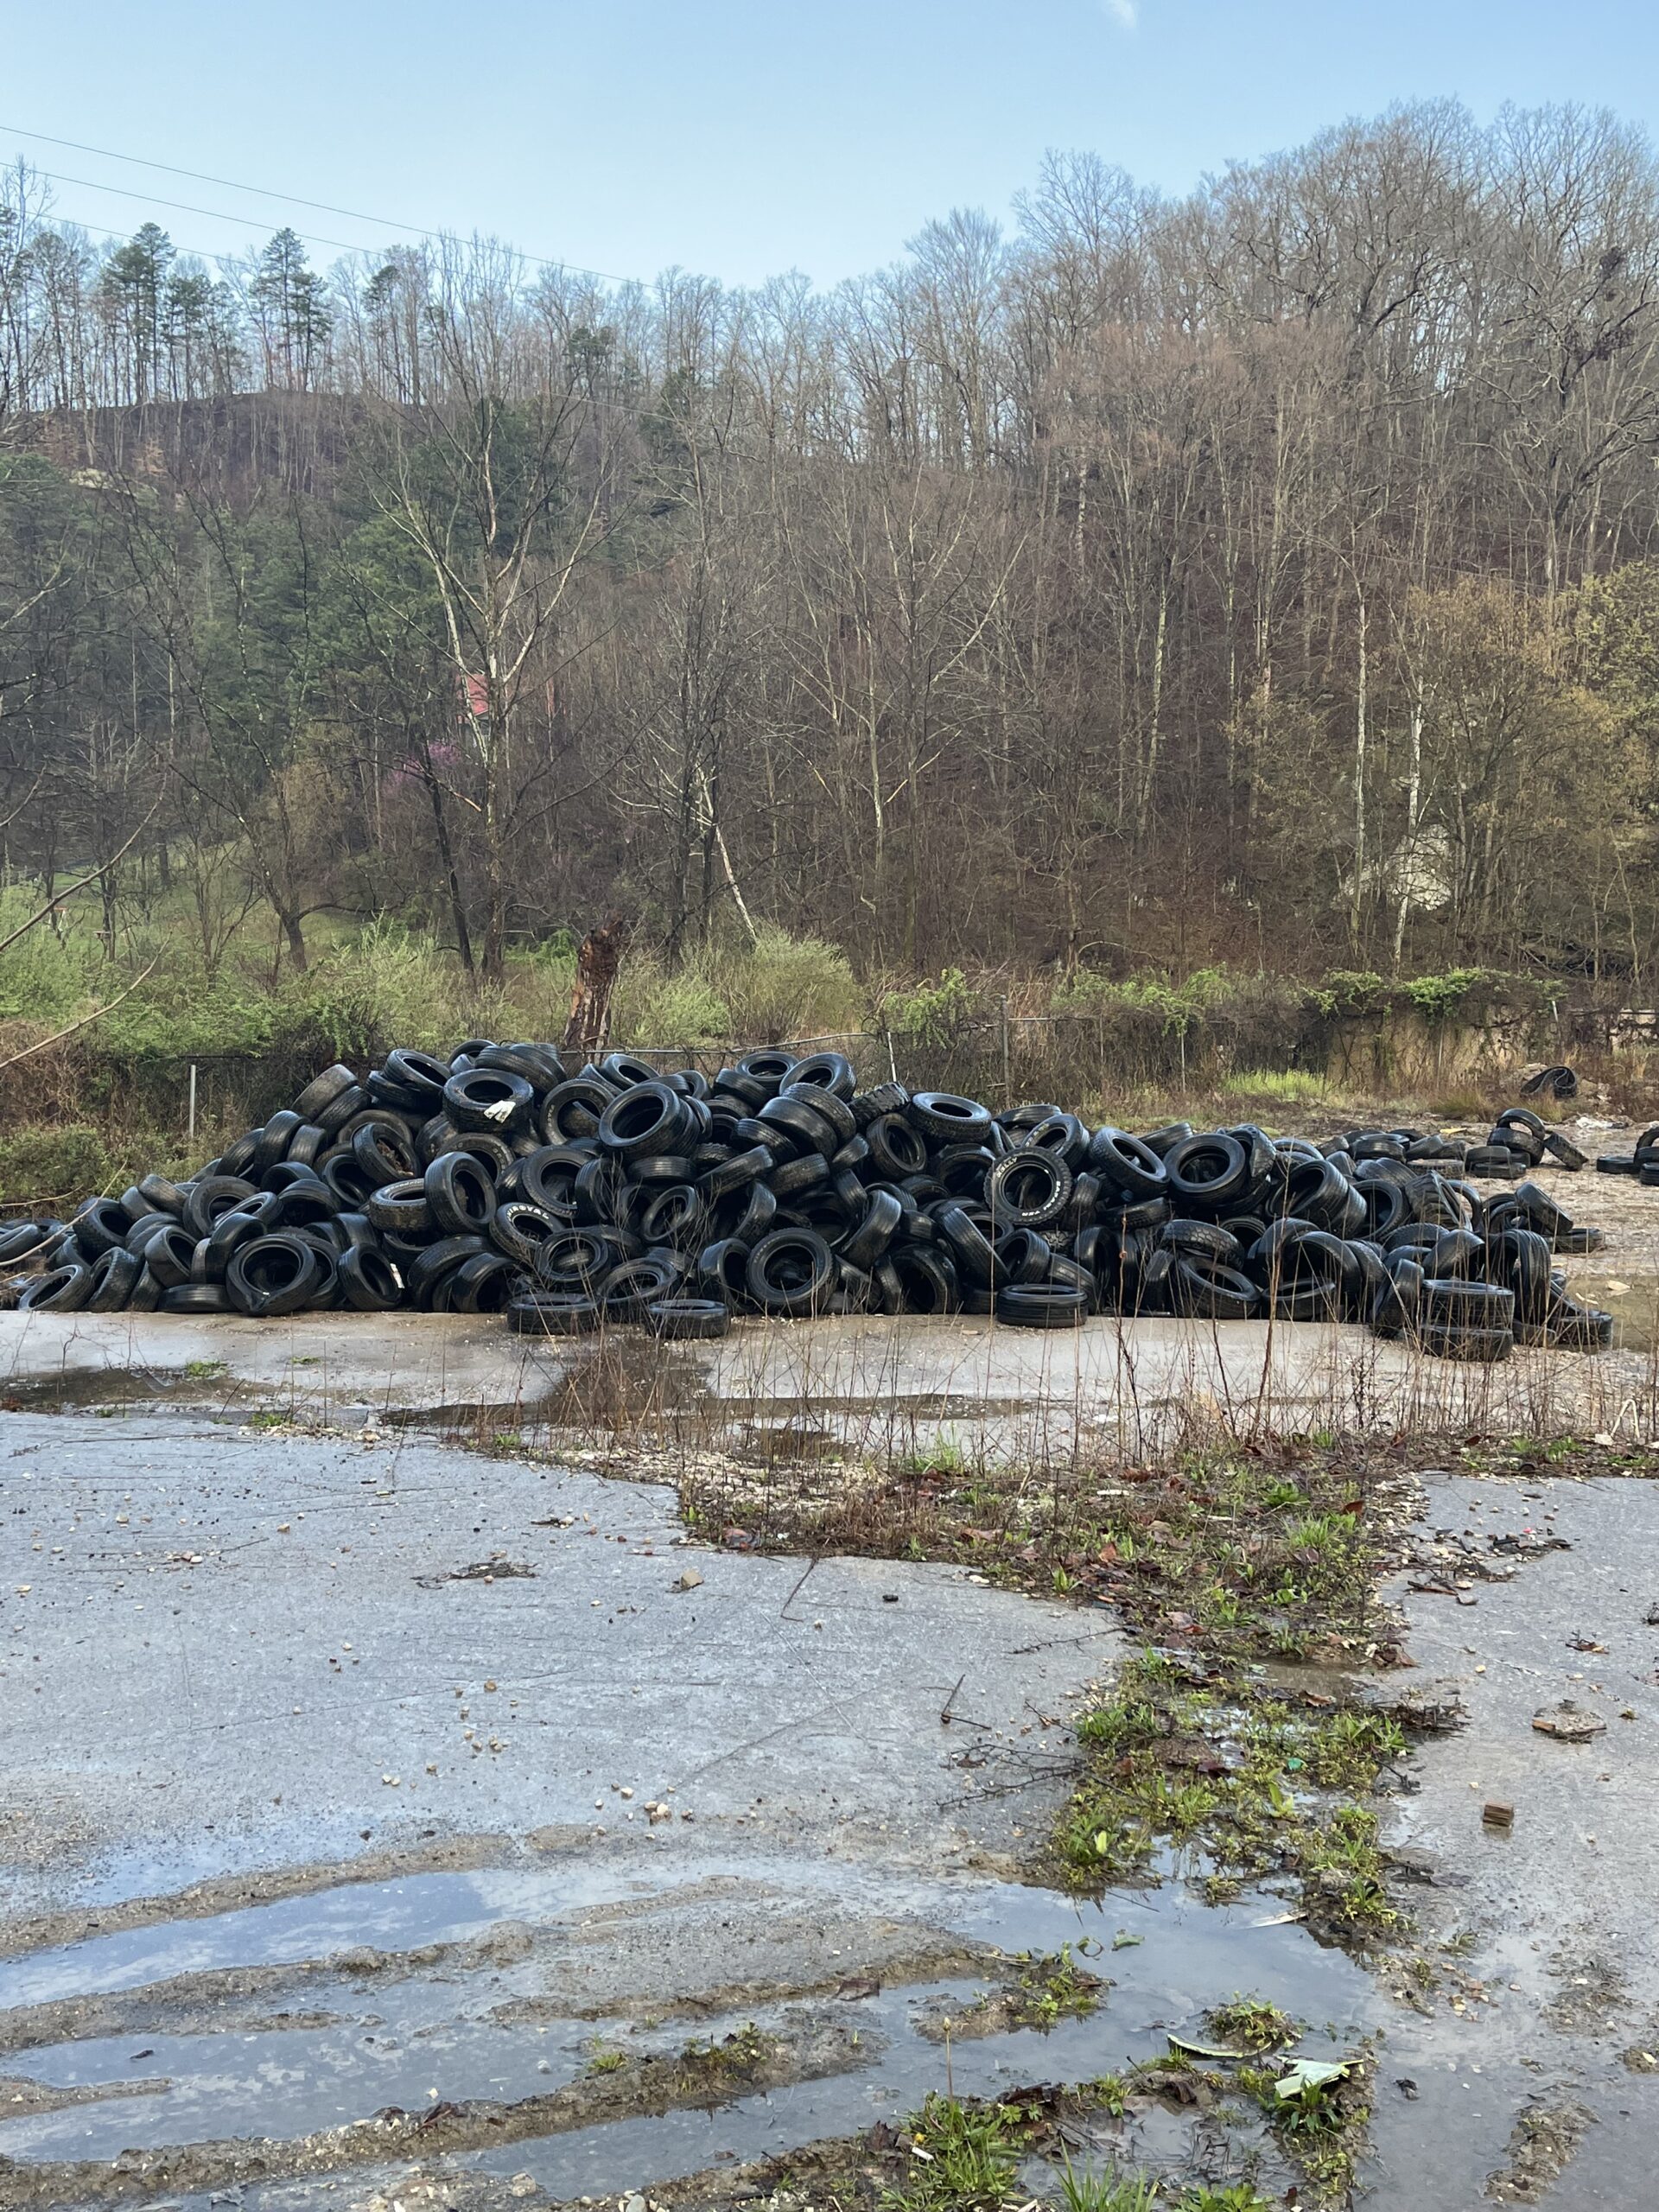 County collects over 14,000 waste tires